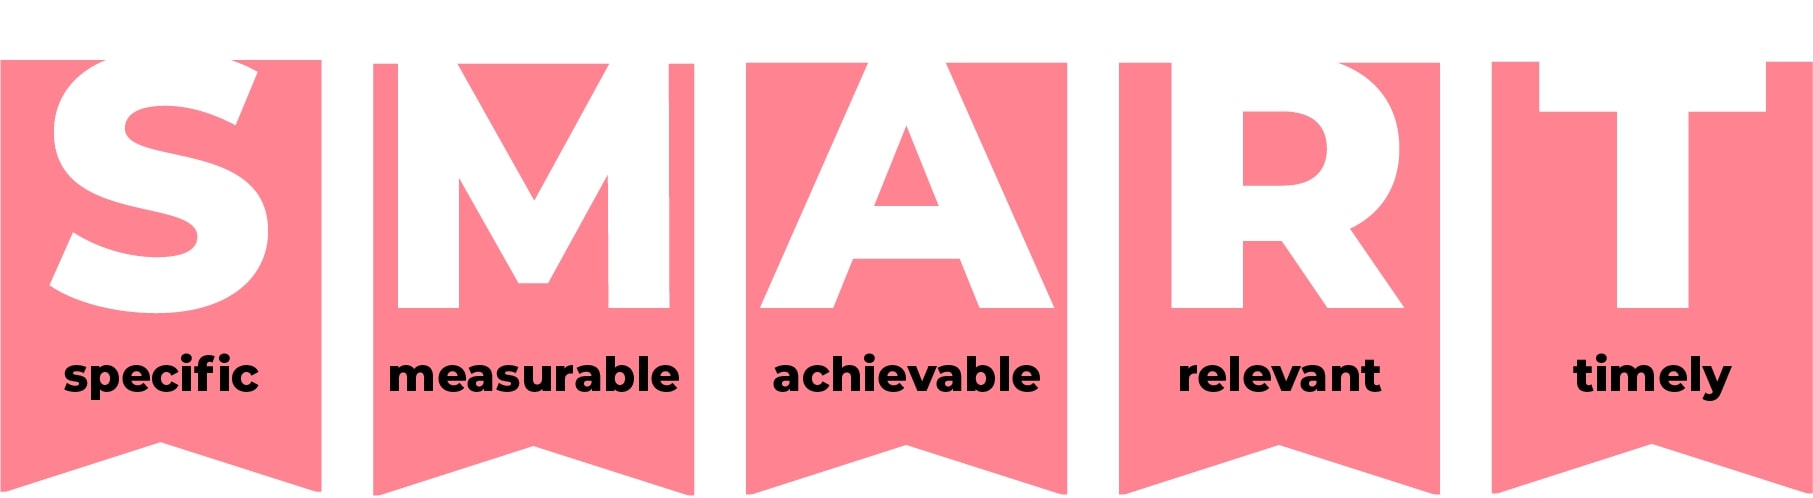 Illustration of banners spelling out "SMART" as in: "Specific," "Measurable," "Achievable," "Relevant," and "Timely"